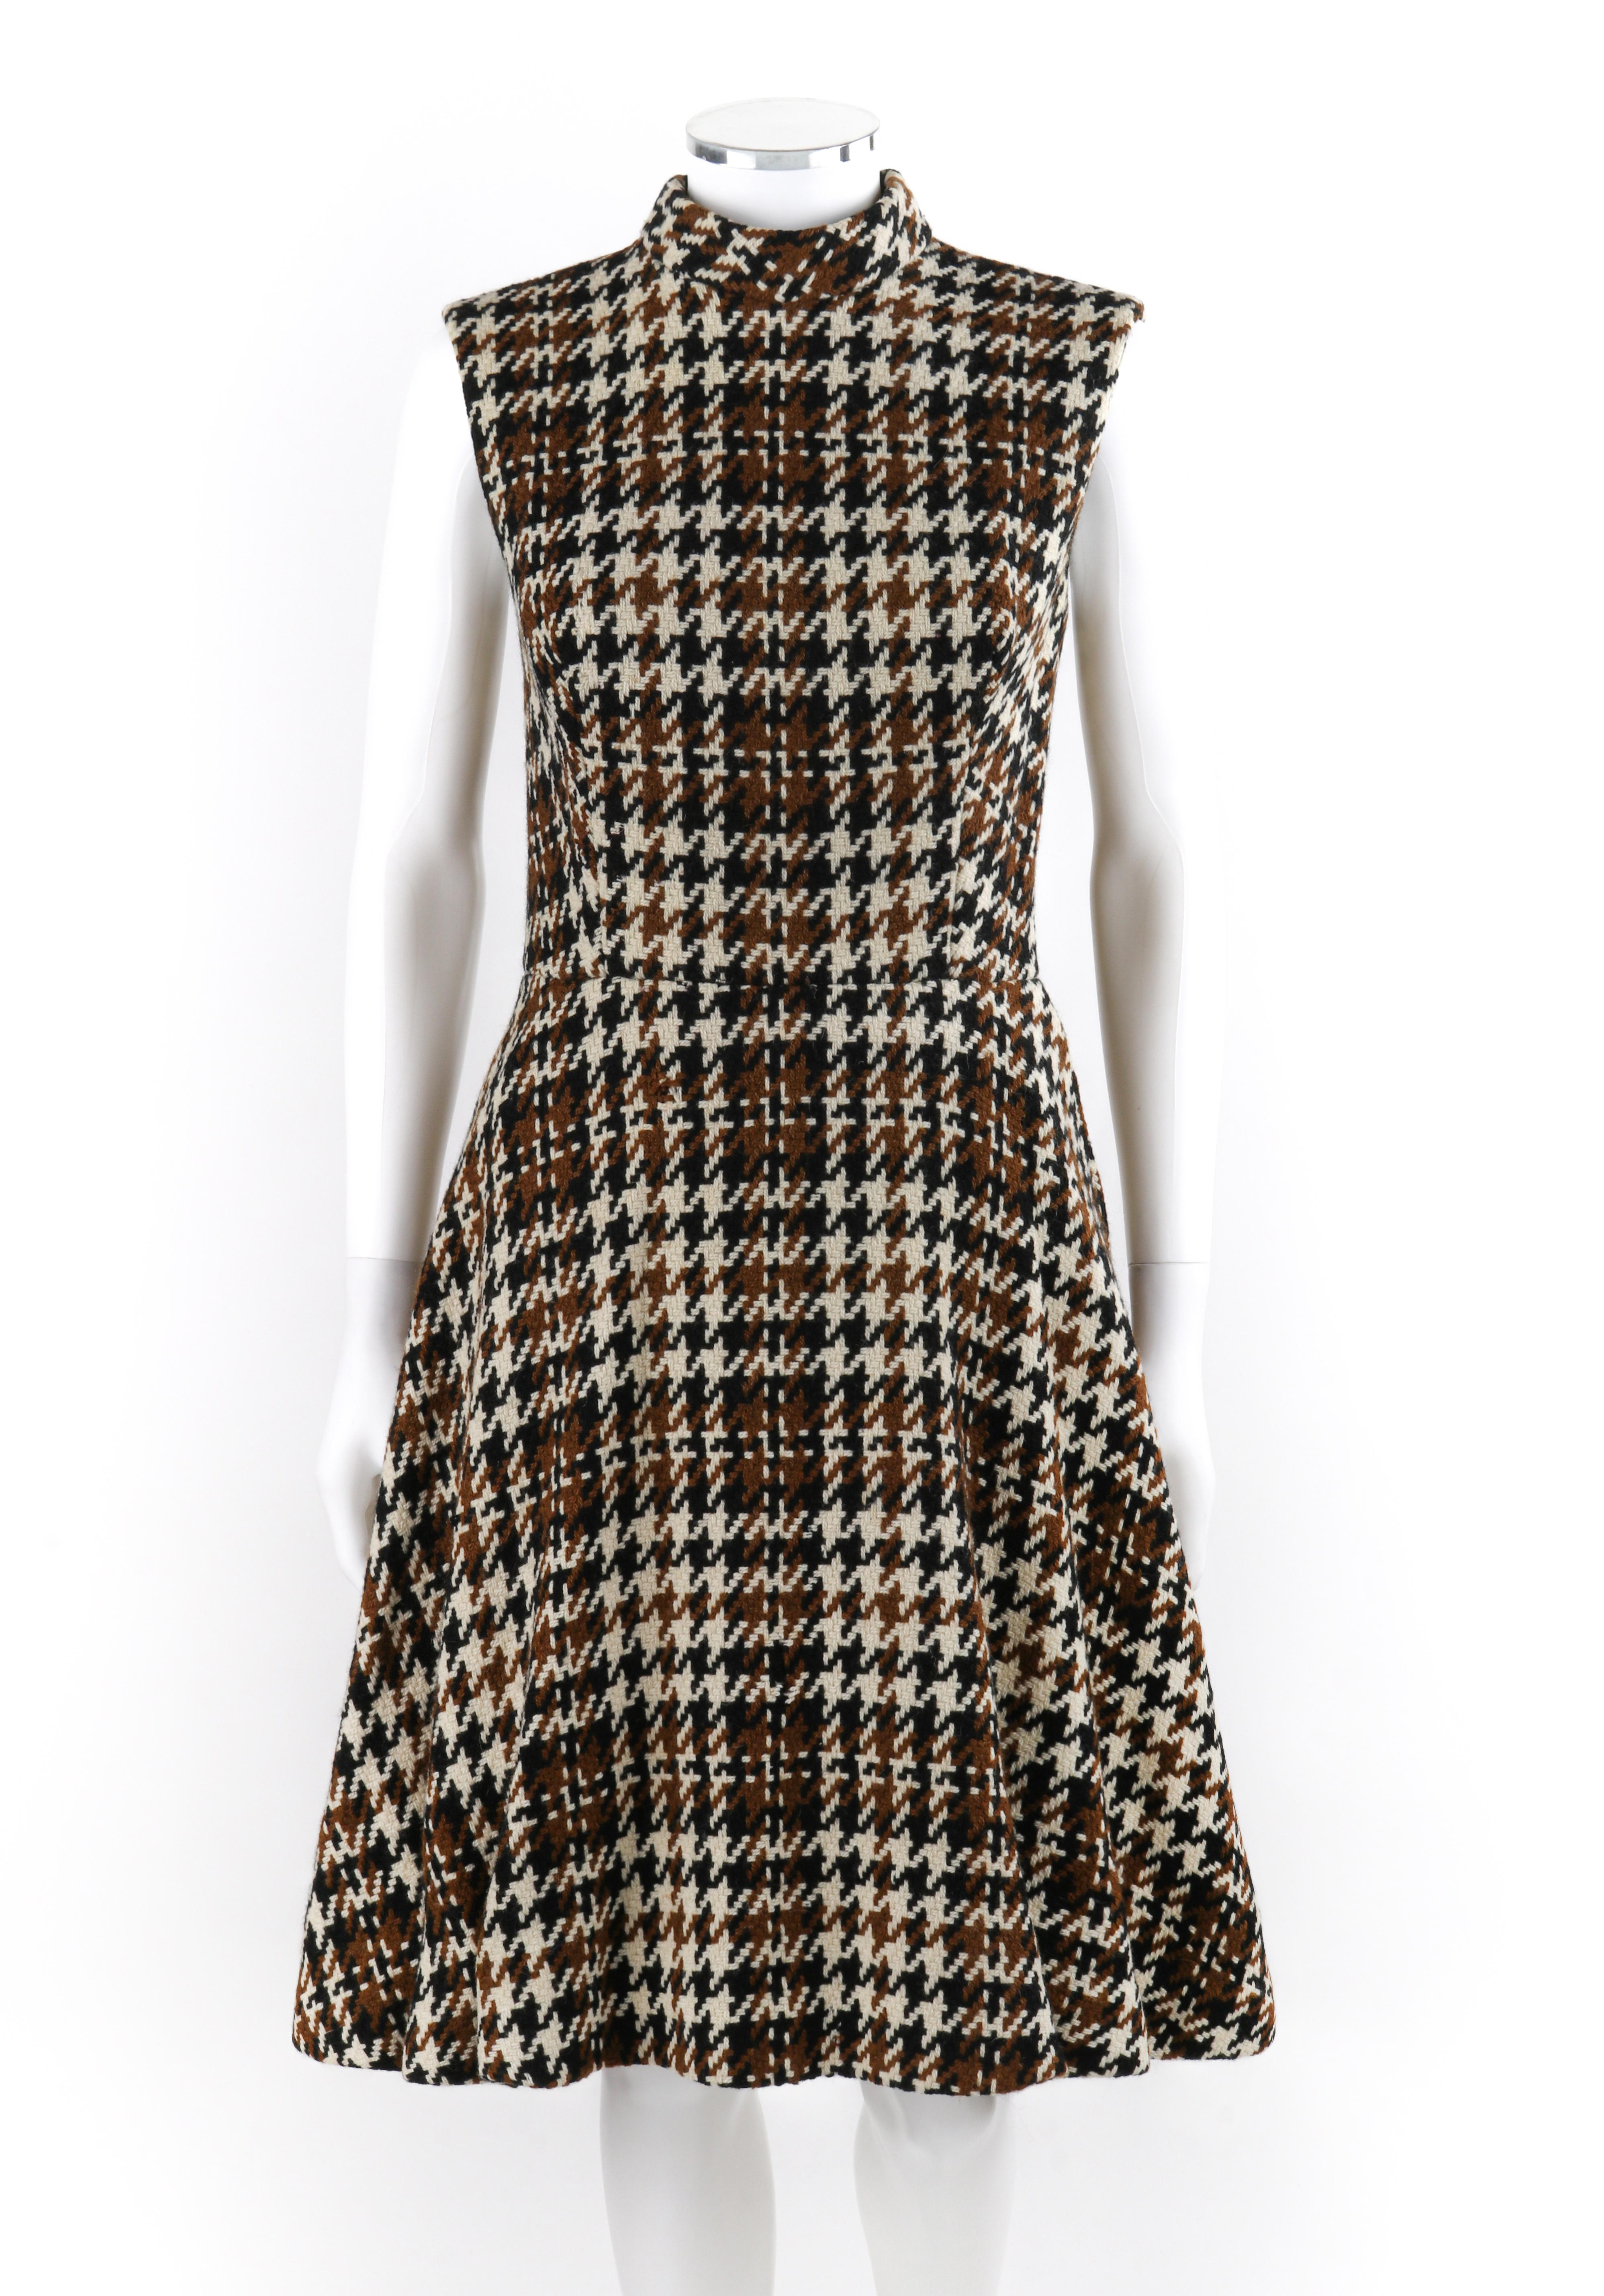 DEBSHIRE ORIGINAL c.1960’s Multicolor Houndstooth Knit A-Line Dress Jacket Set
Circa: 1960’s 
Label(s): Debshire Original
Style: Dress and jacket set
Color(s): Shades of brown, cream, black
Lined: Yes
Unmarked Fabric Content (feel of): Shell: Wool;